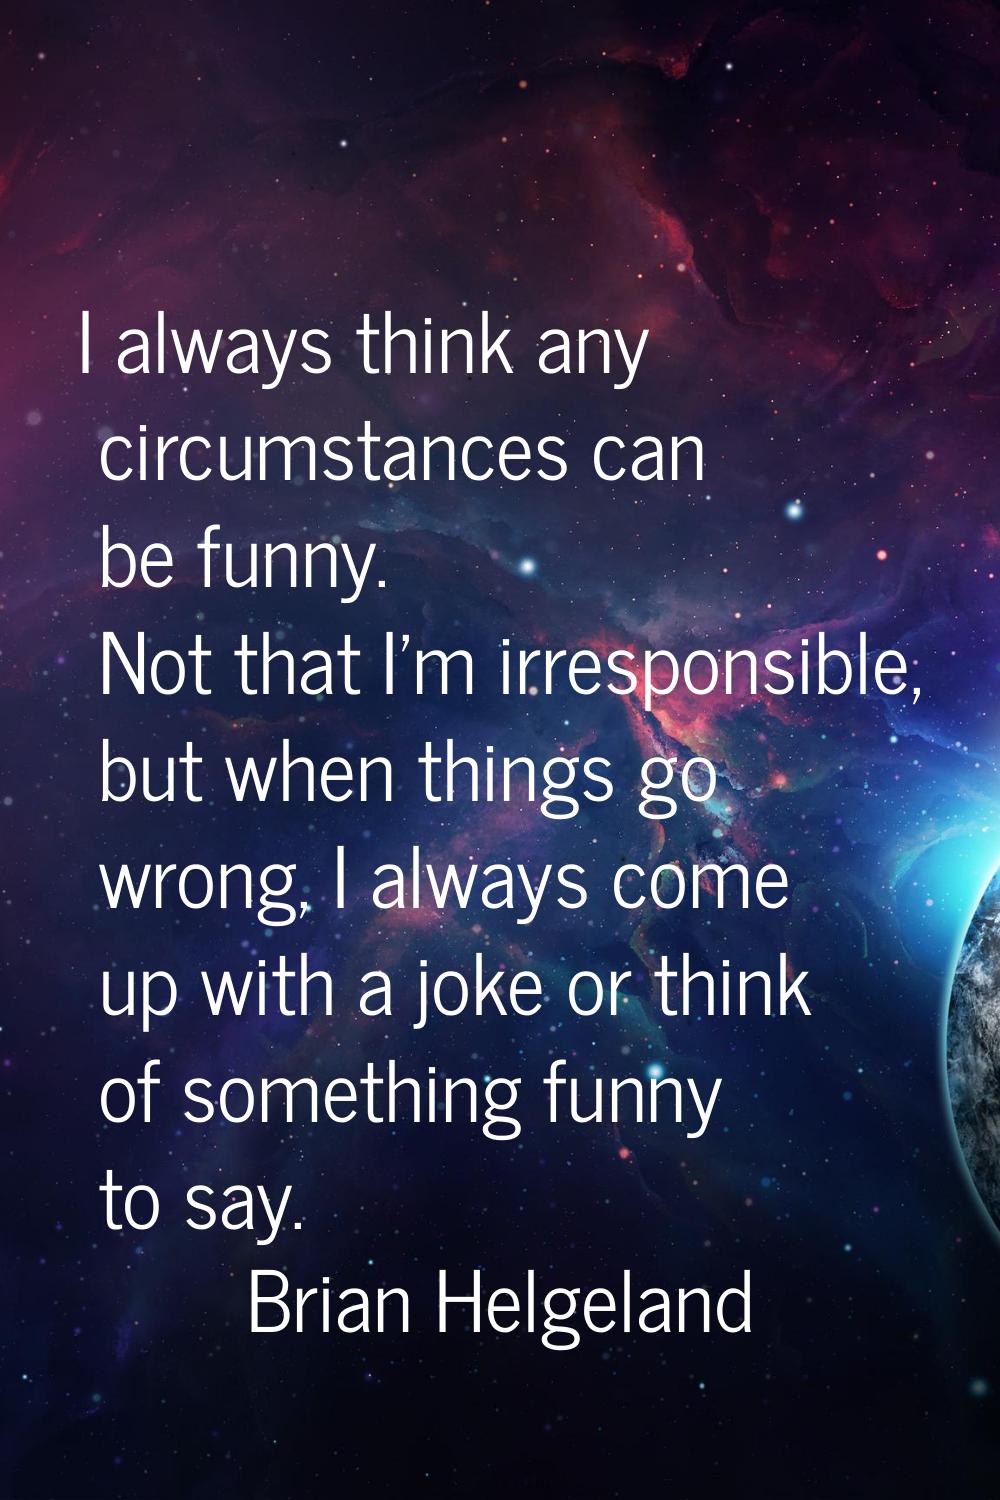 I always think any circumstances can be funny. Not that I'm irresponsible, but when things go wrong